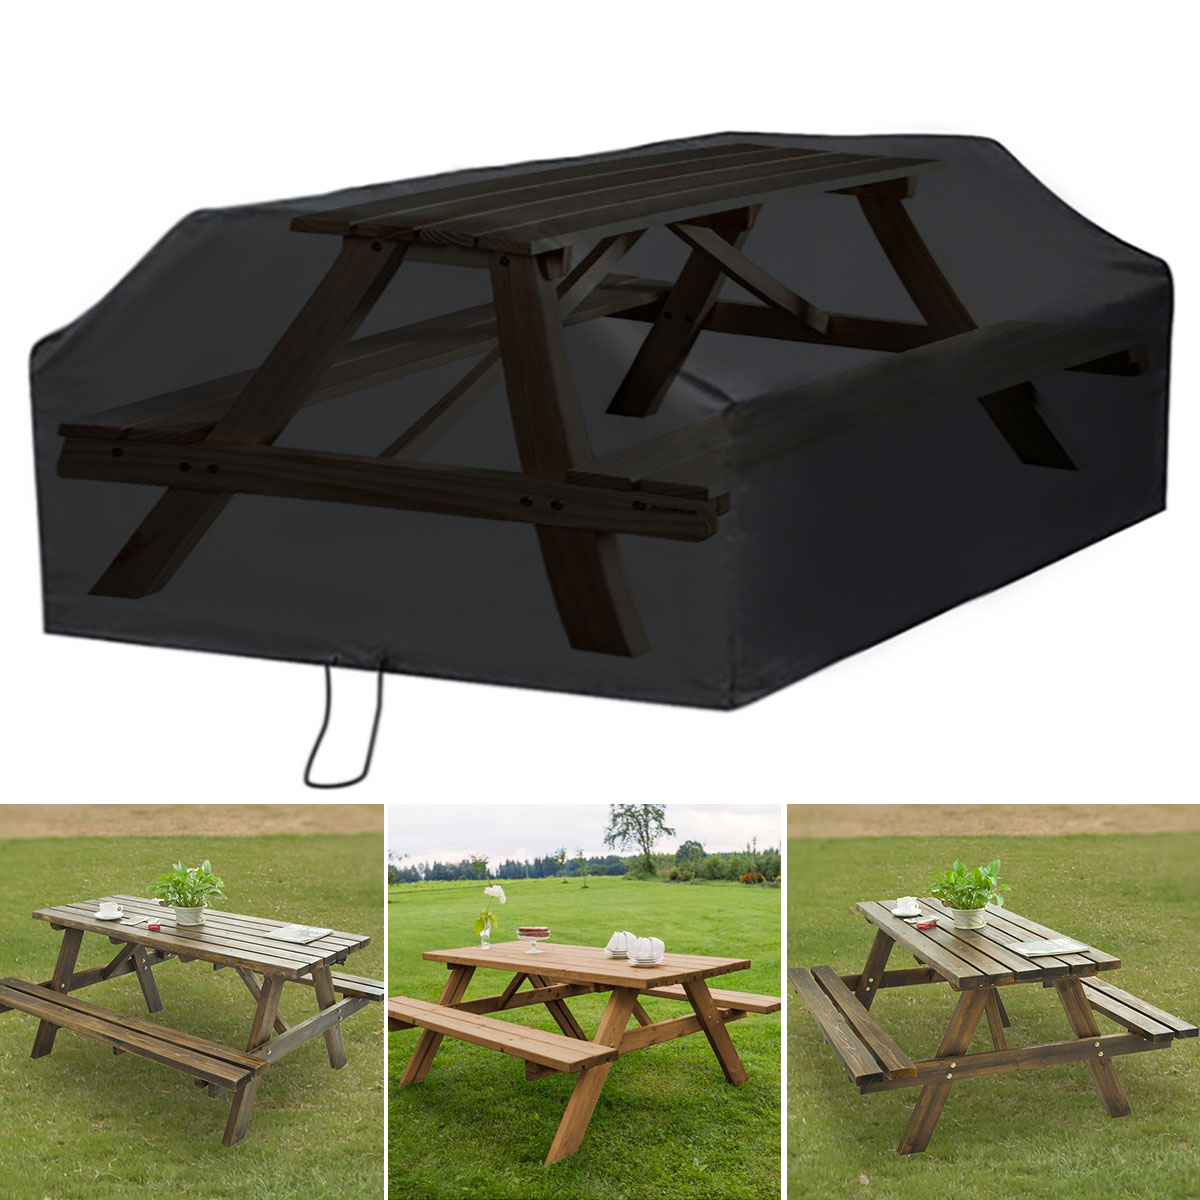 210D Black Waterproof Anti Dust Picnic Table Cover Outdoor 6/8 Seater Square Tablecloth Elastic Garden Patio Furniture Cover